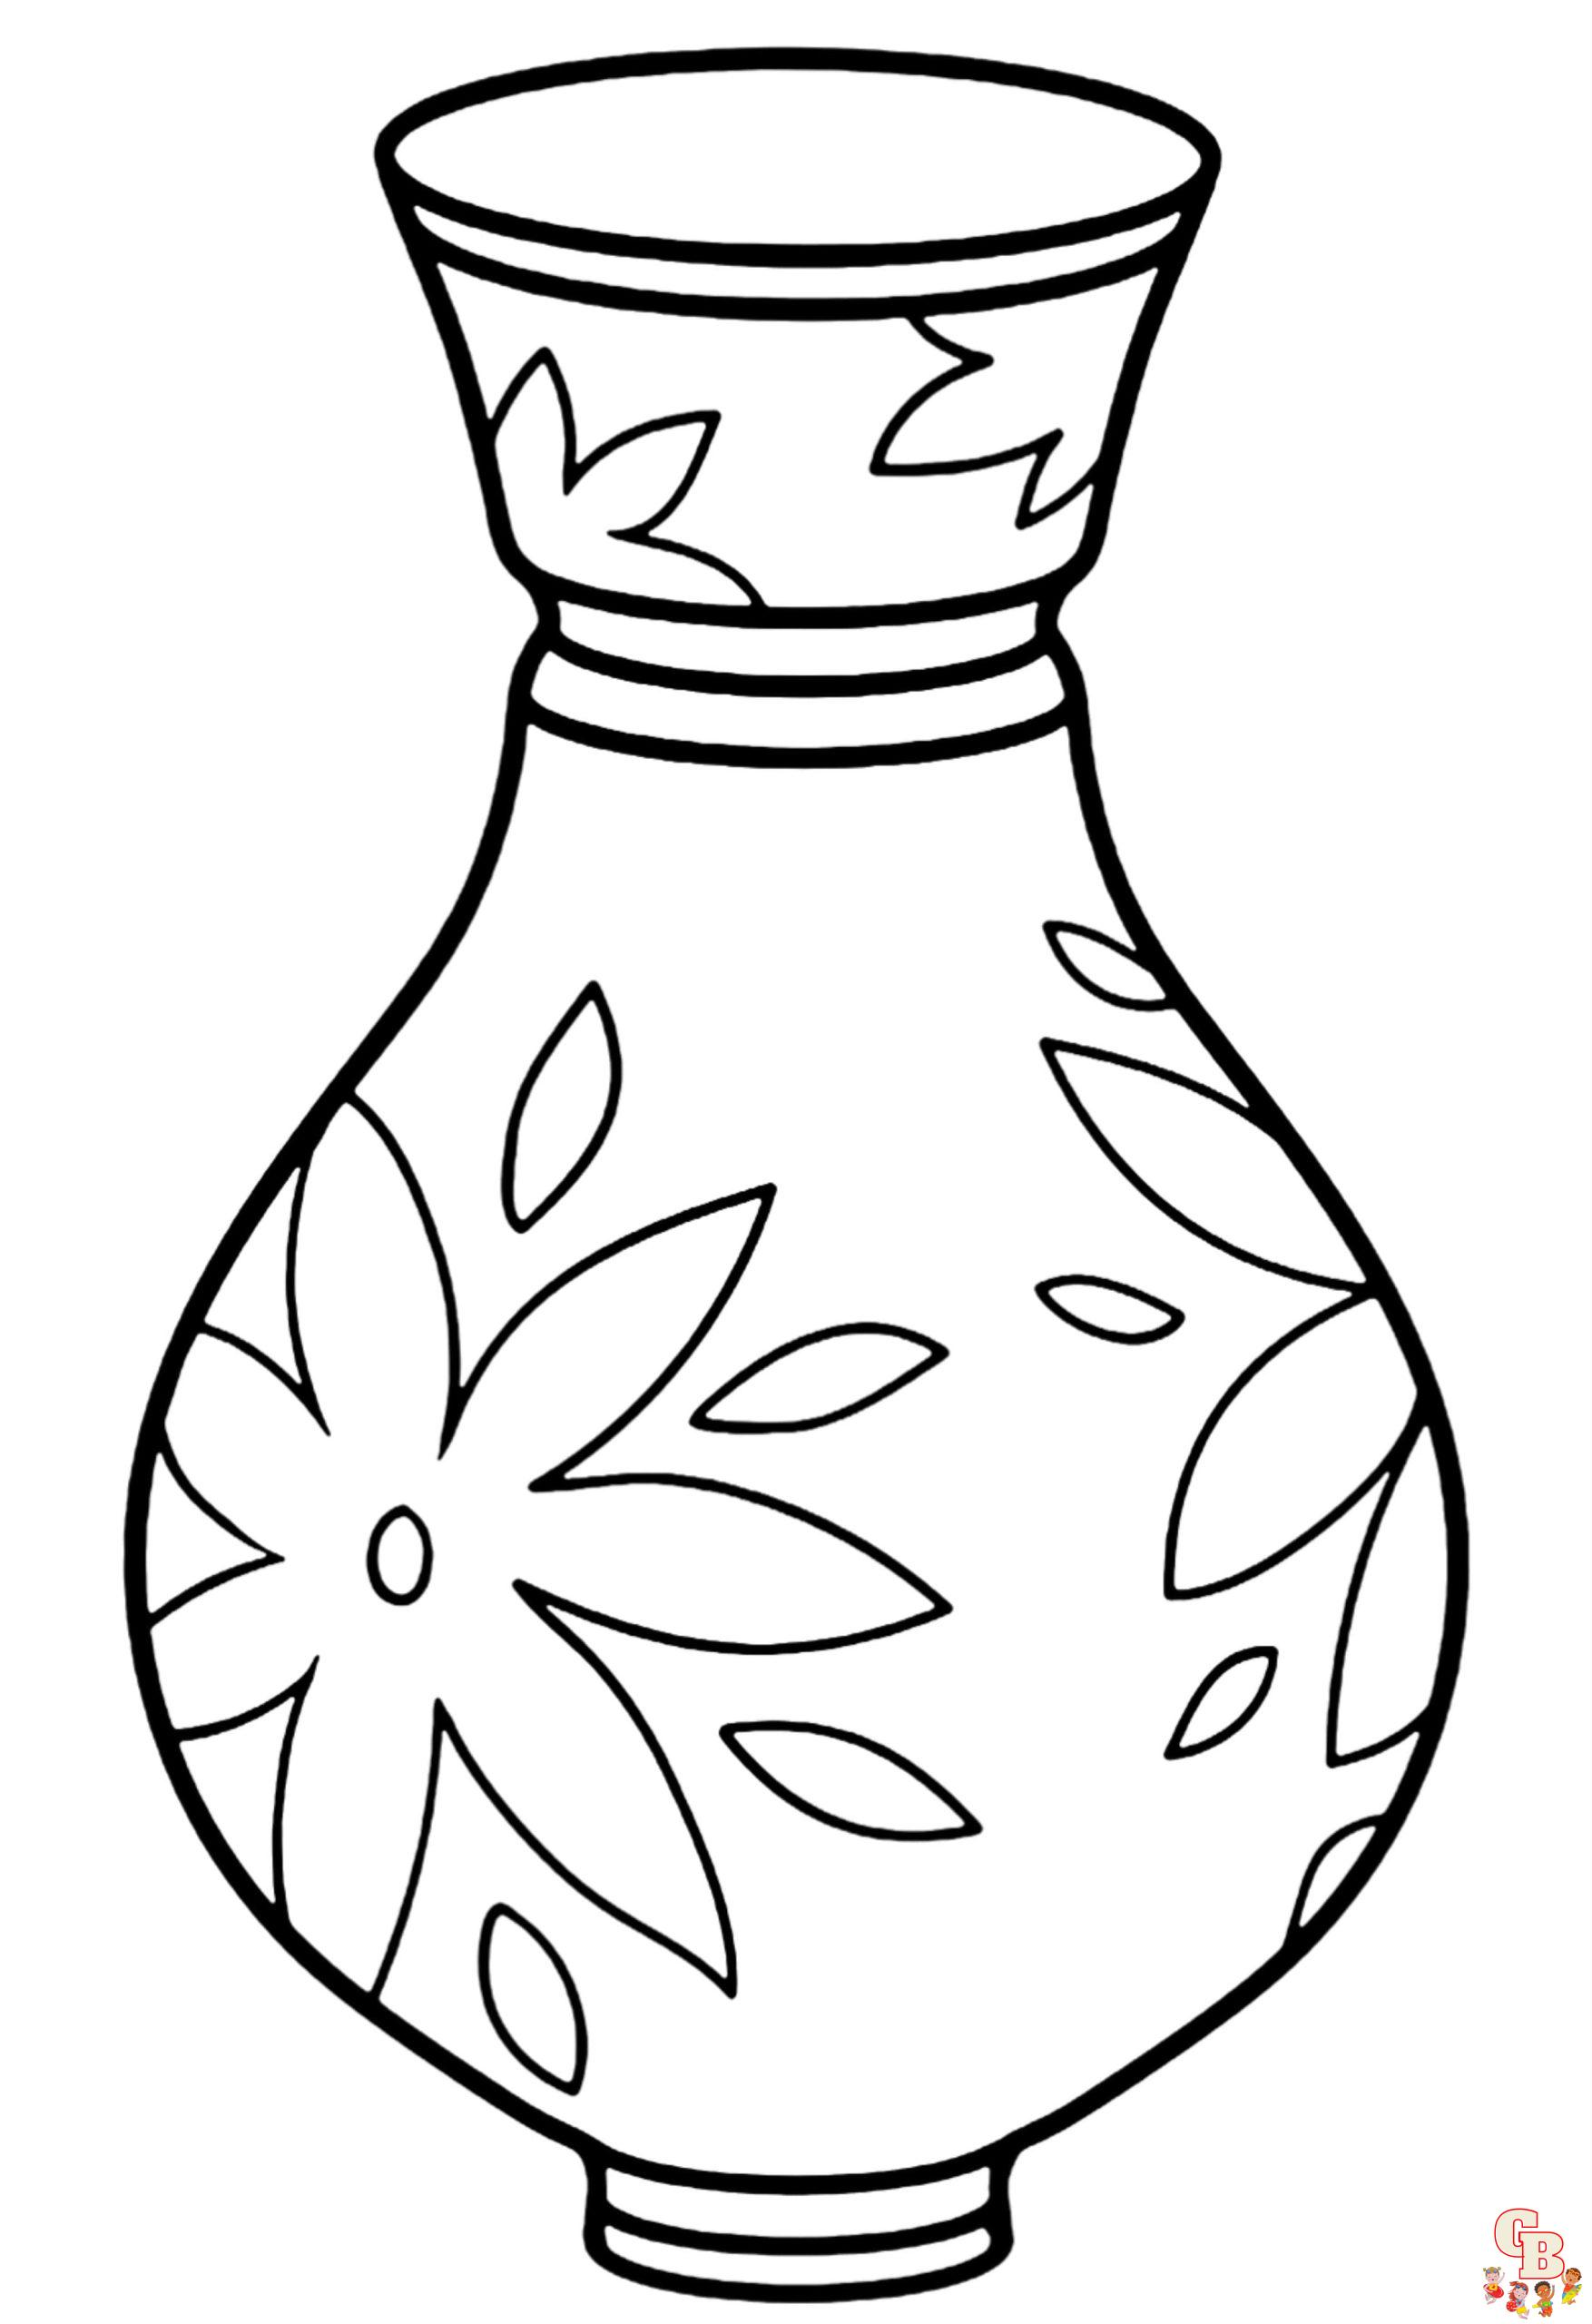 Printable vase coloring pages free for kids and adults